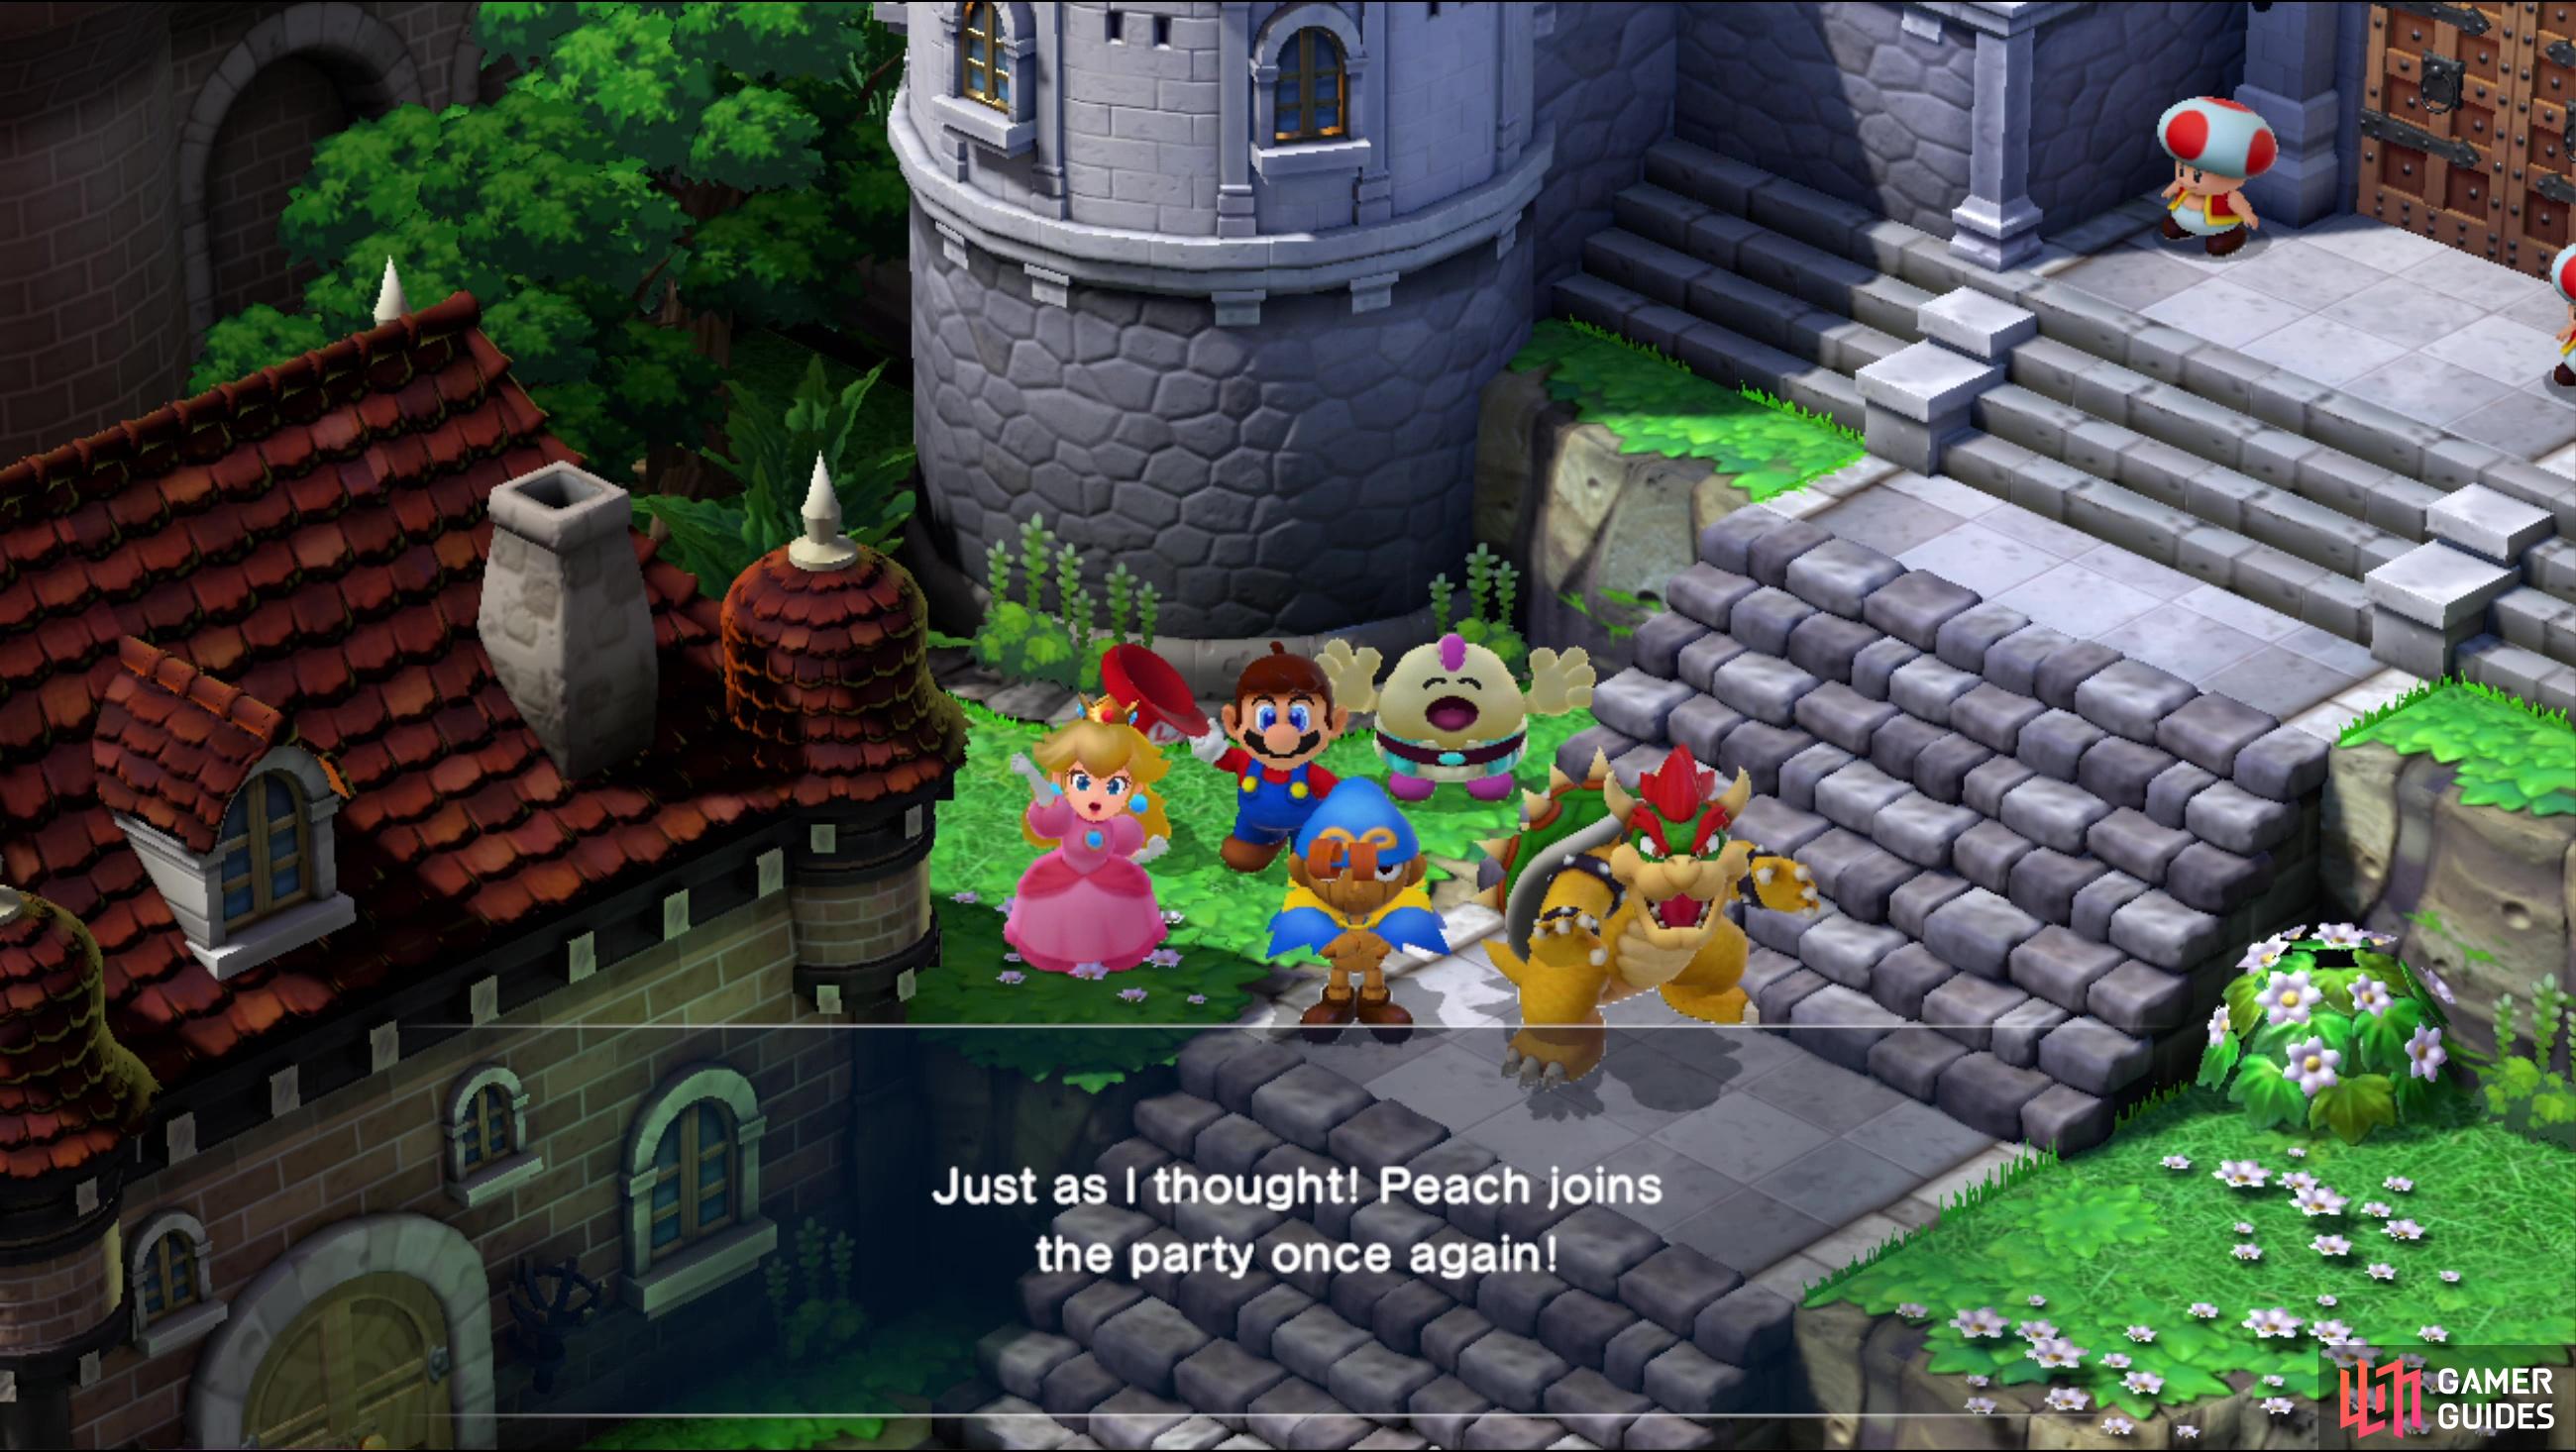 Return to the Mushroom Kingdom and after quite a bit of chatter, Peach will join your party.